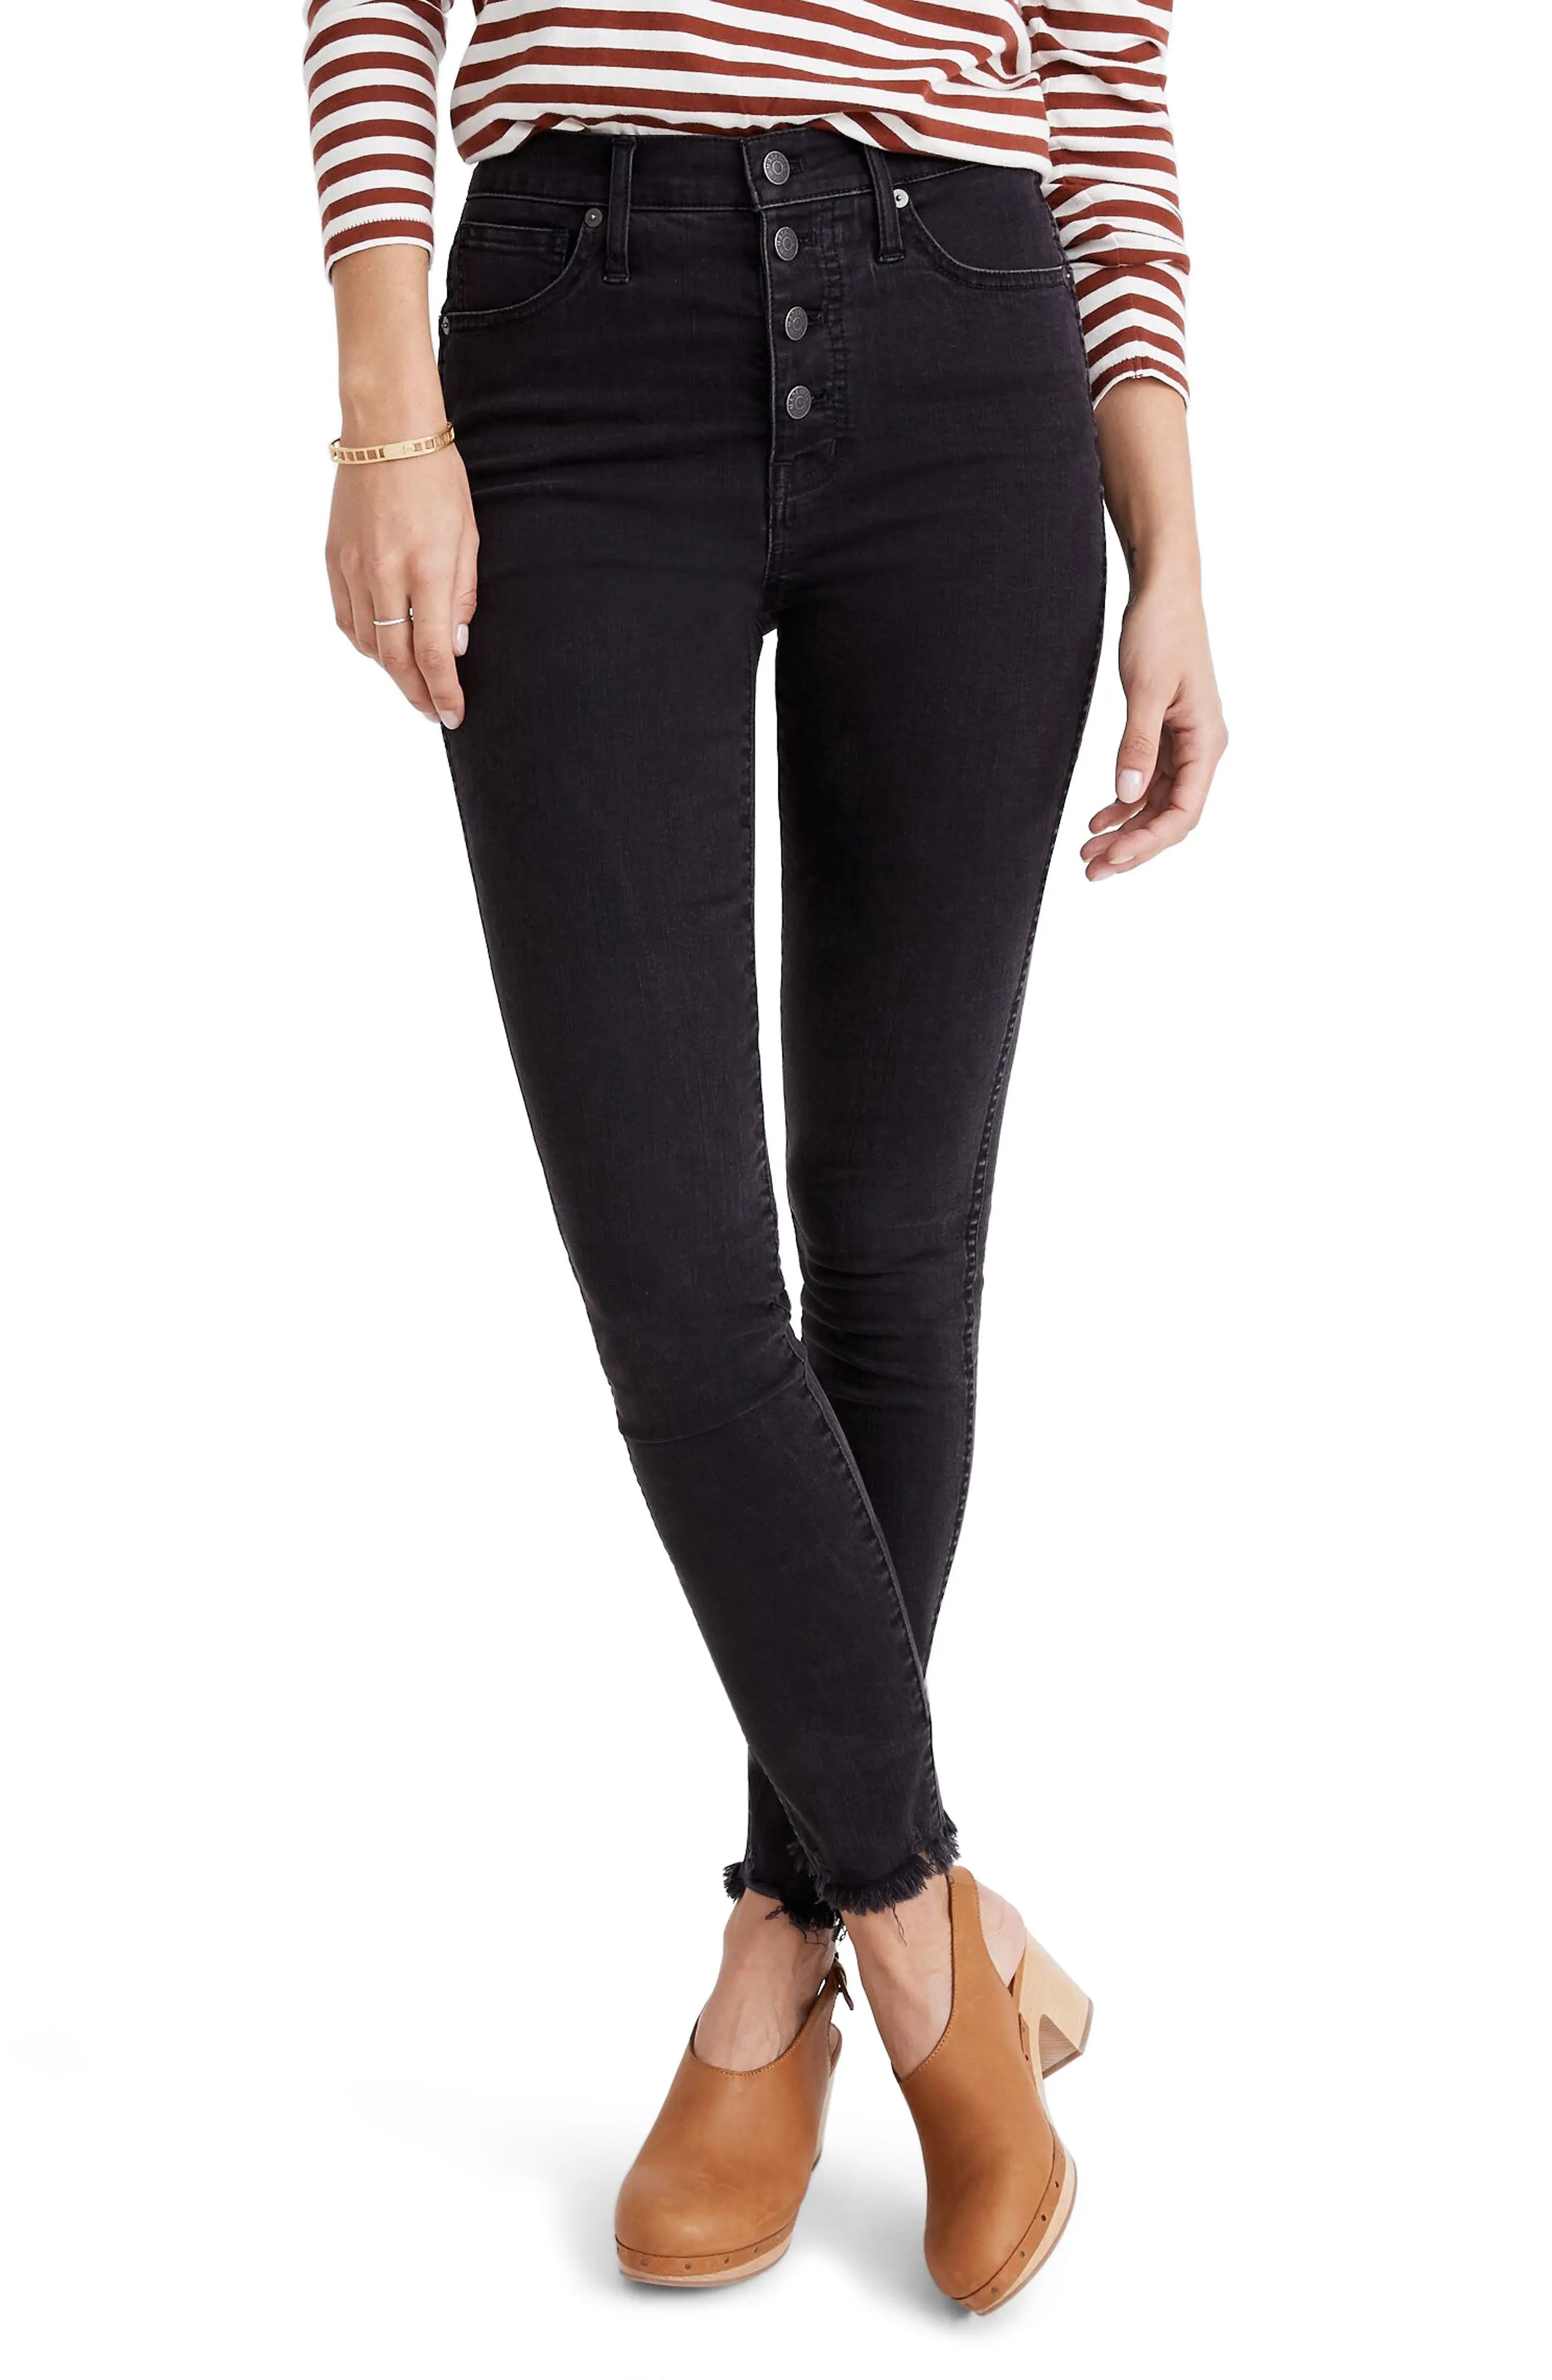 Women's Madewell 10-Inch High Waist Skinny Jeans Button-Through Edition, Size 23 - Black | Nordstrom